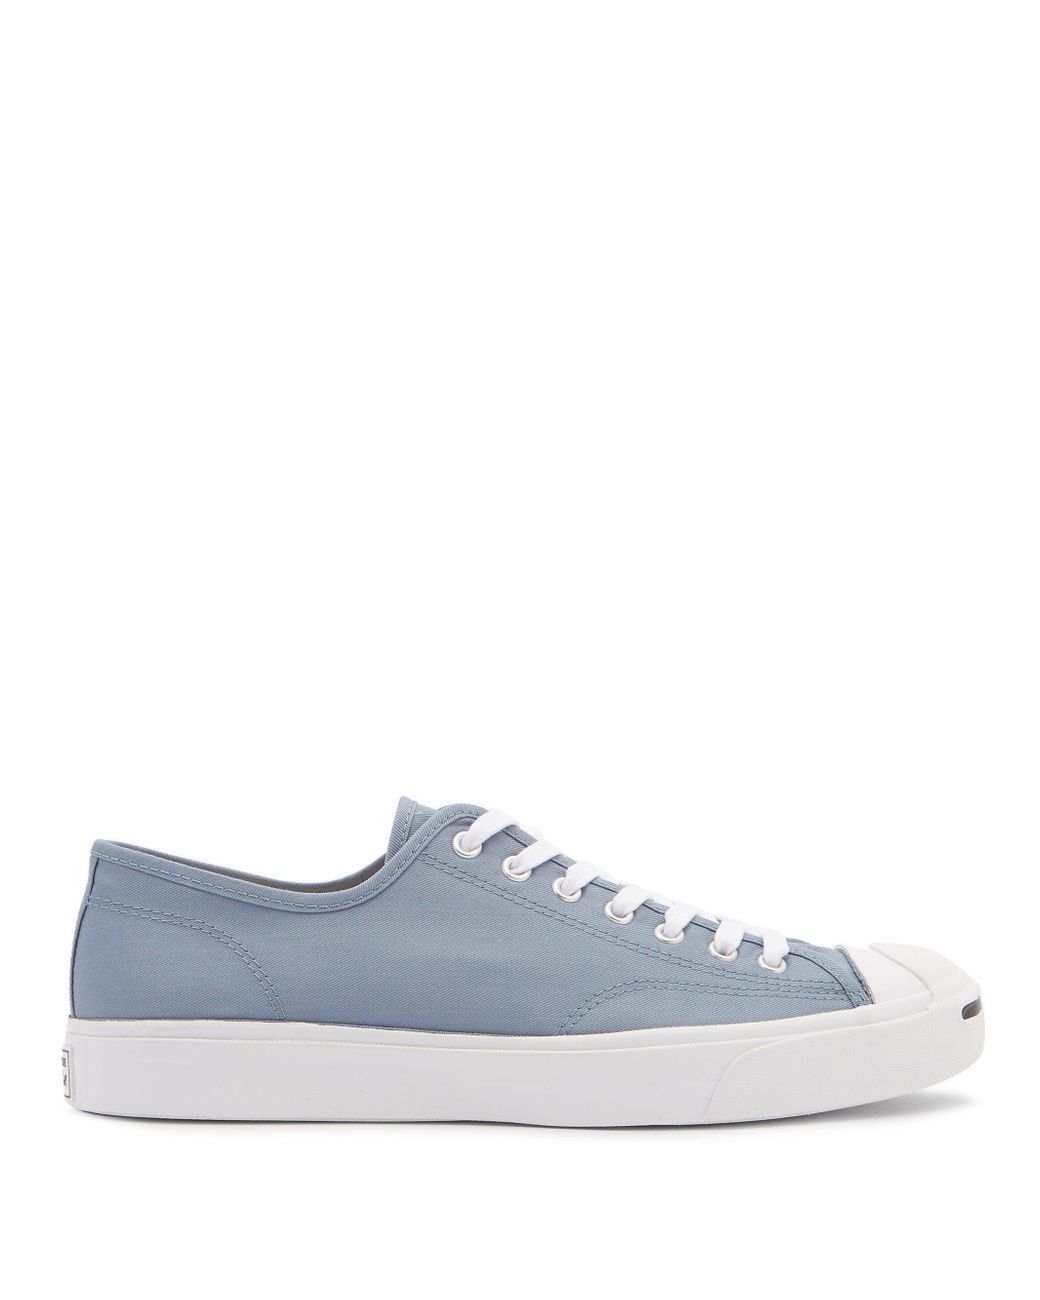 Converse Jack Purcell Canvas Trainers in Blue for Men - Lyst